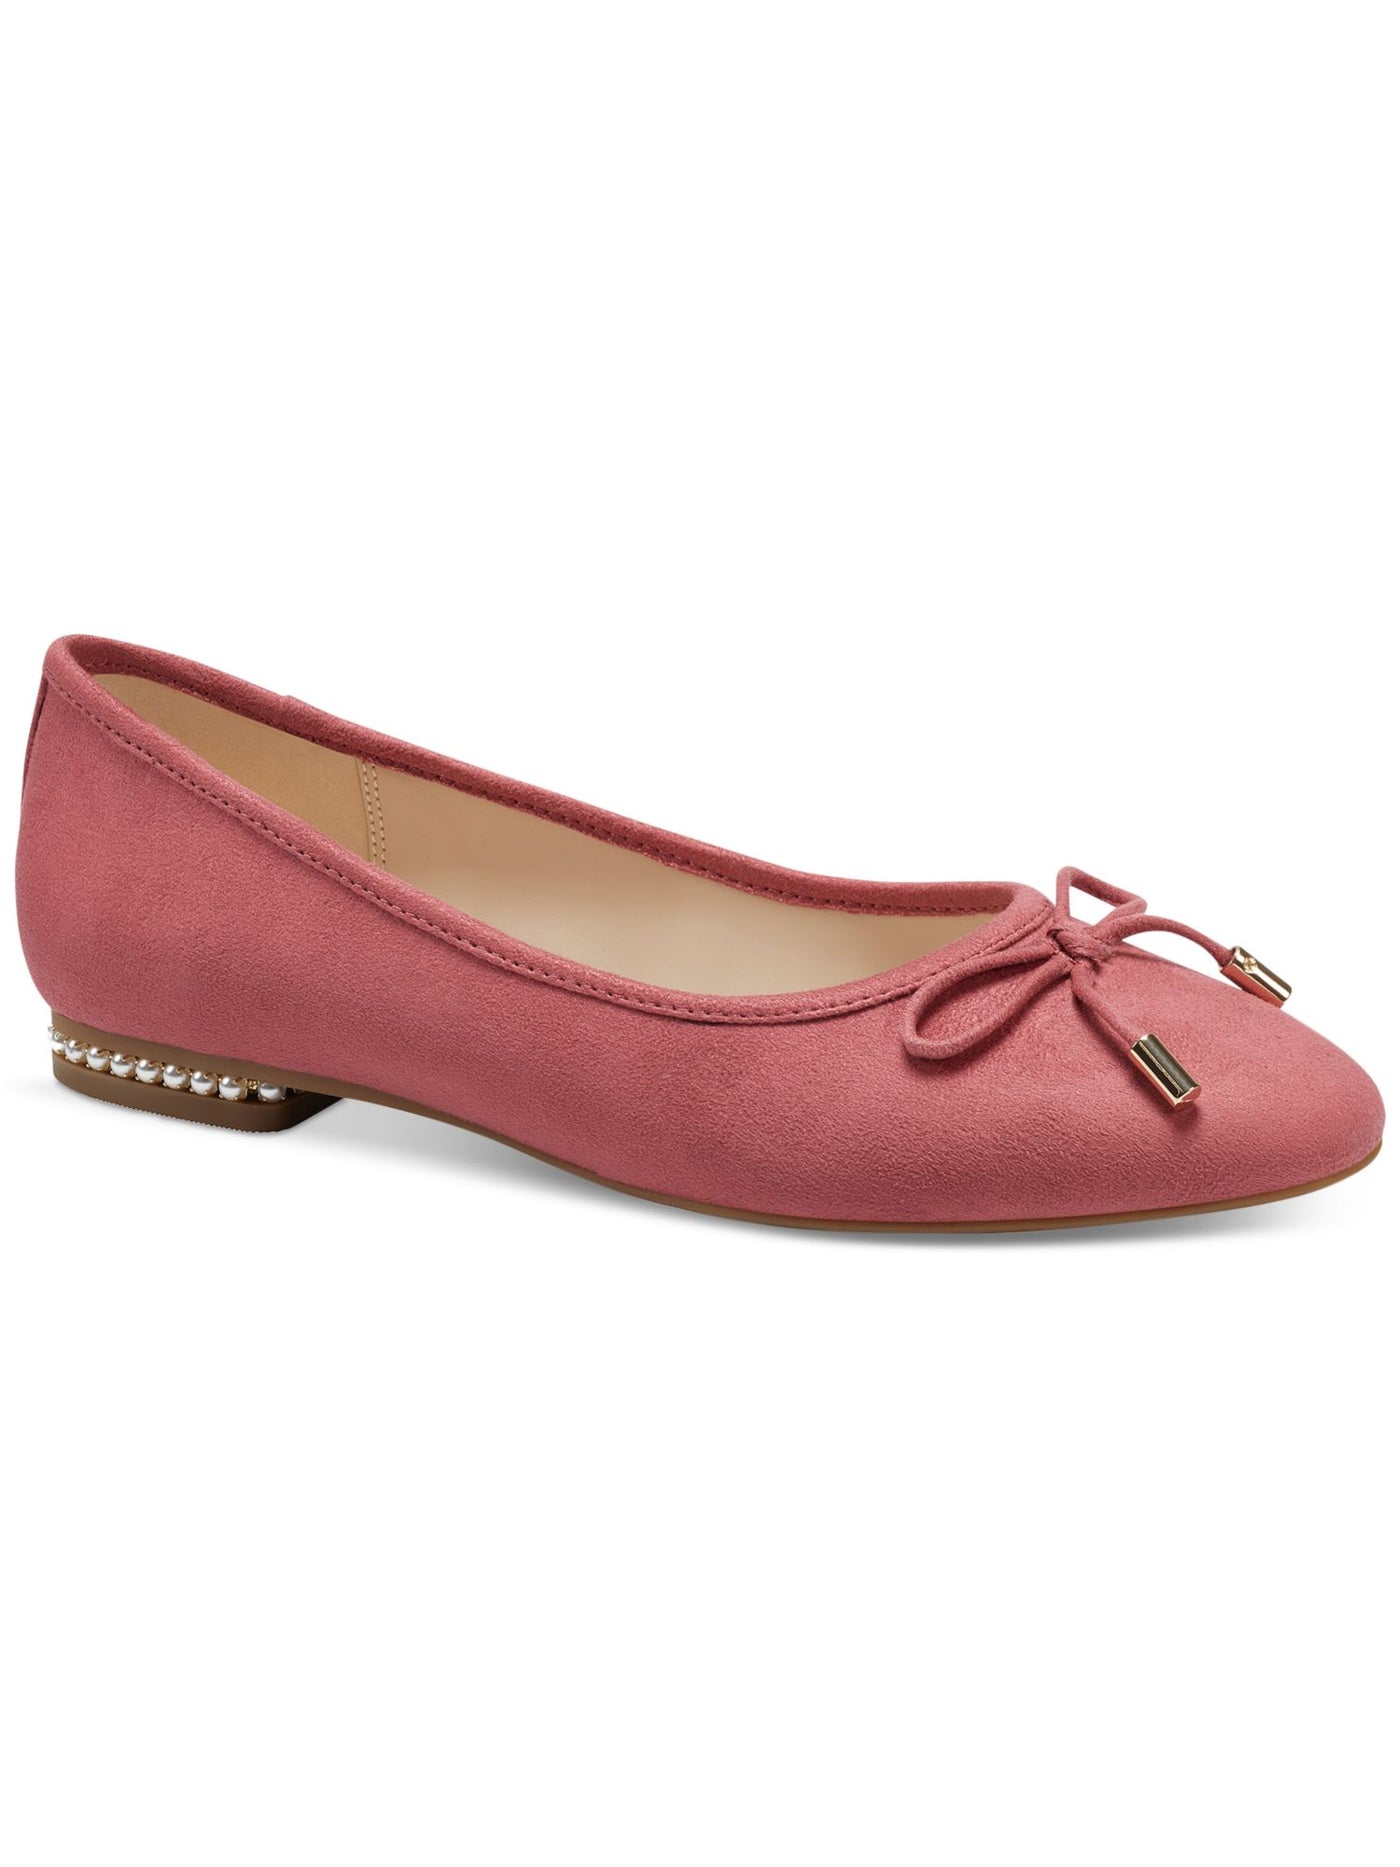 CHARTER CLUB Womens Pink Embellished Heel Bow Accent Padded Liyaa Round Toe Slip On Ballet Flats 9.5 M